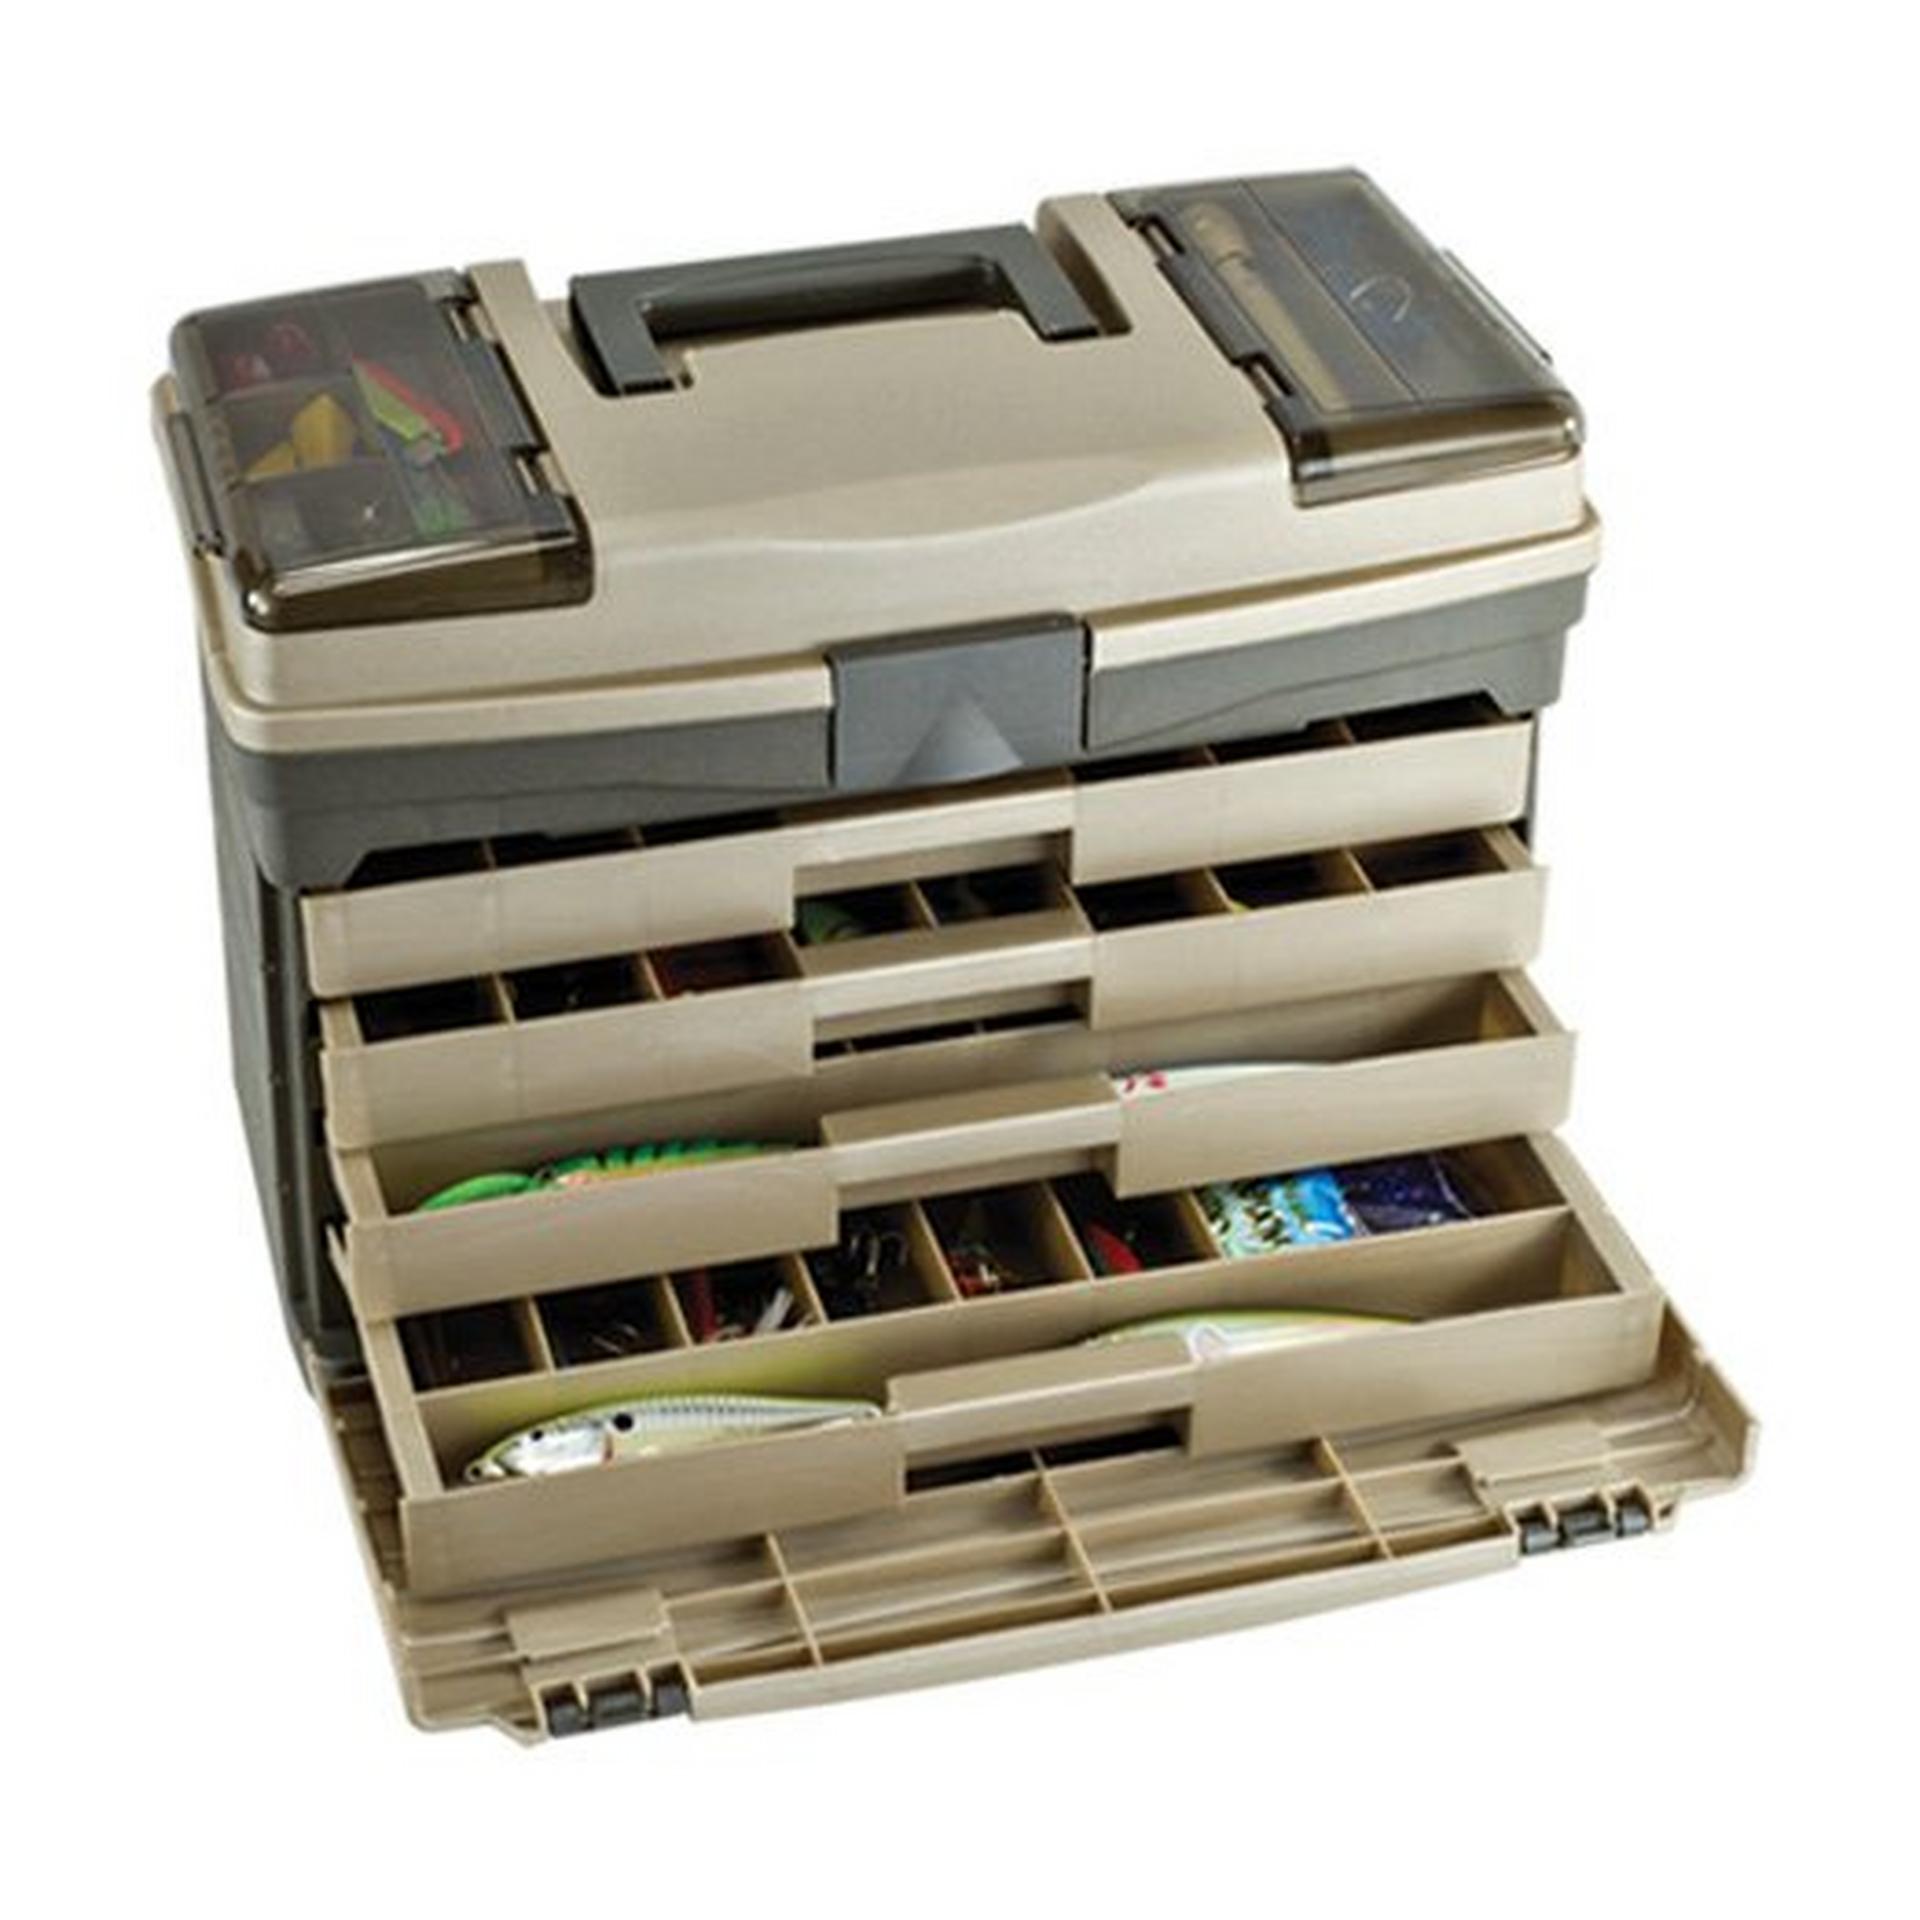 Guide Series™ Drawer Tackle Box